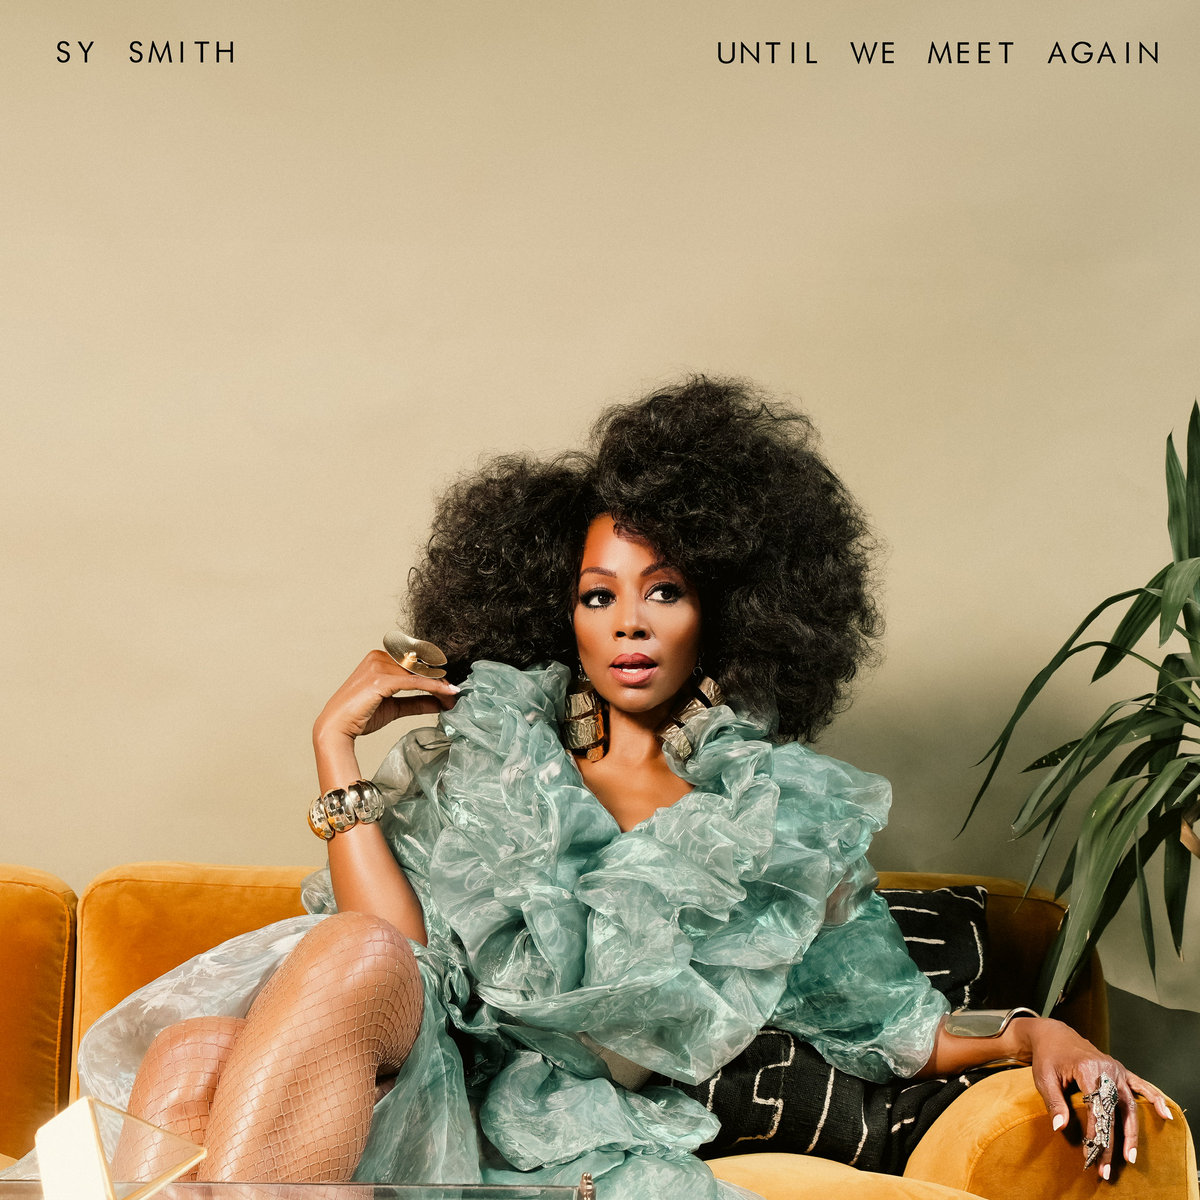 This entire album from beginning to end (no skips) is 🔥🔥🔥🔥🔥 #SySmith 🫶🏾 #UntilWeMeetAgain 💐 #FEMusic 💯